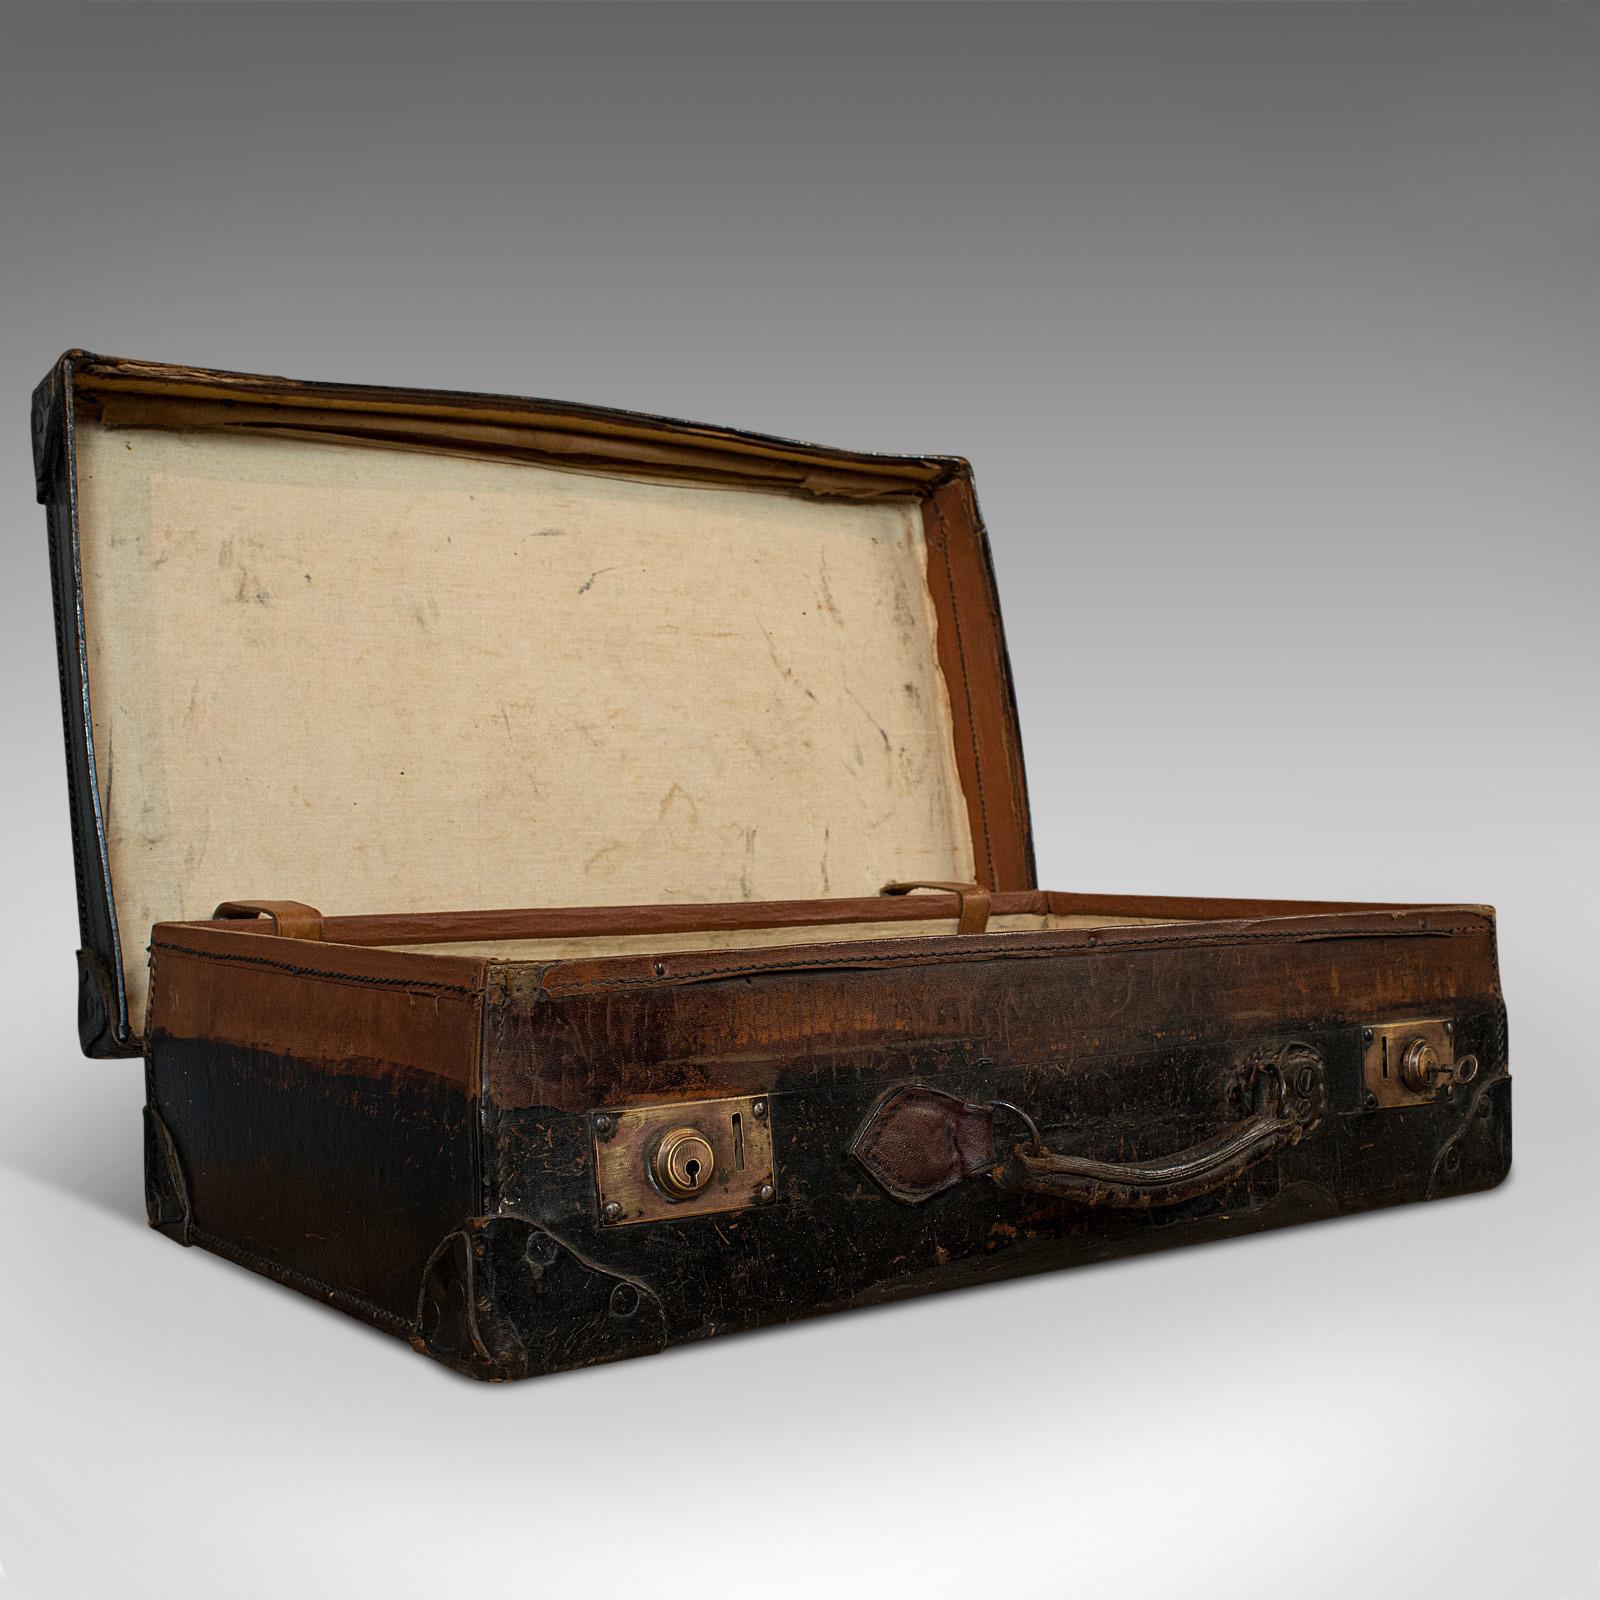 This is an antique suitcase. An English, leather travelling salesman's or officer's case, dating to the Edwardian period, circa 1910.

Generously sized antique case
Displays a desirable aged patina
Leather shows deep black hues
Stitched seams